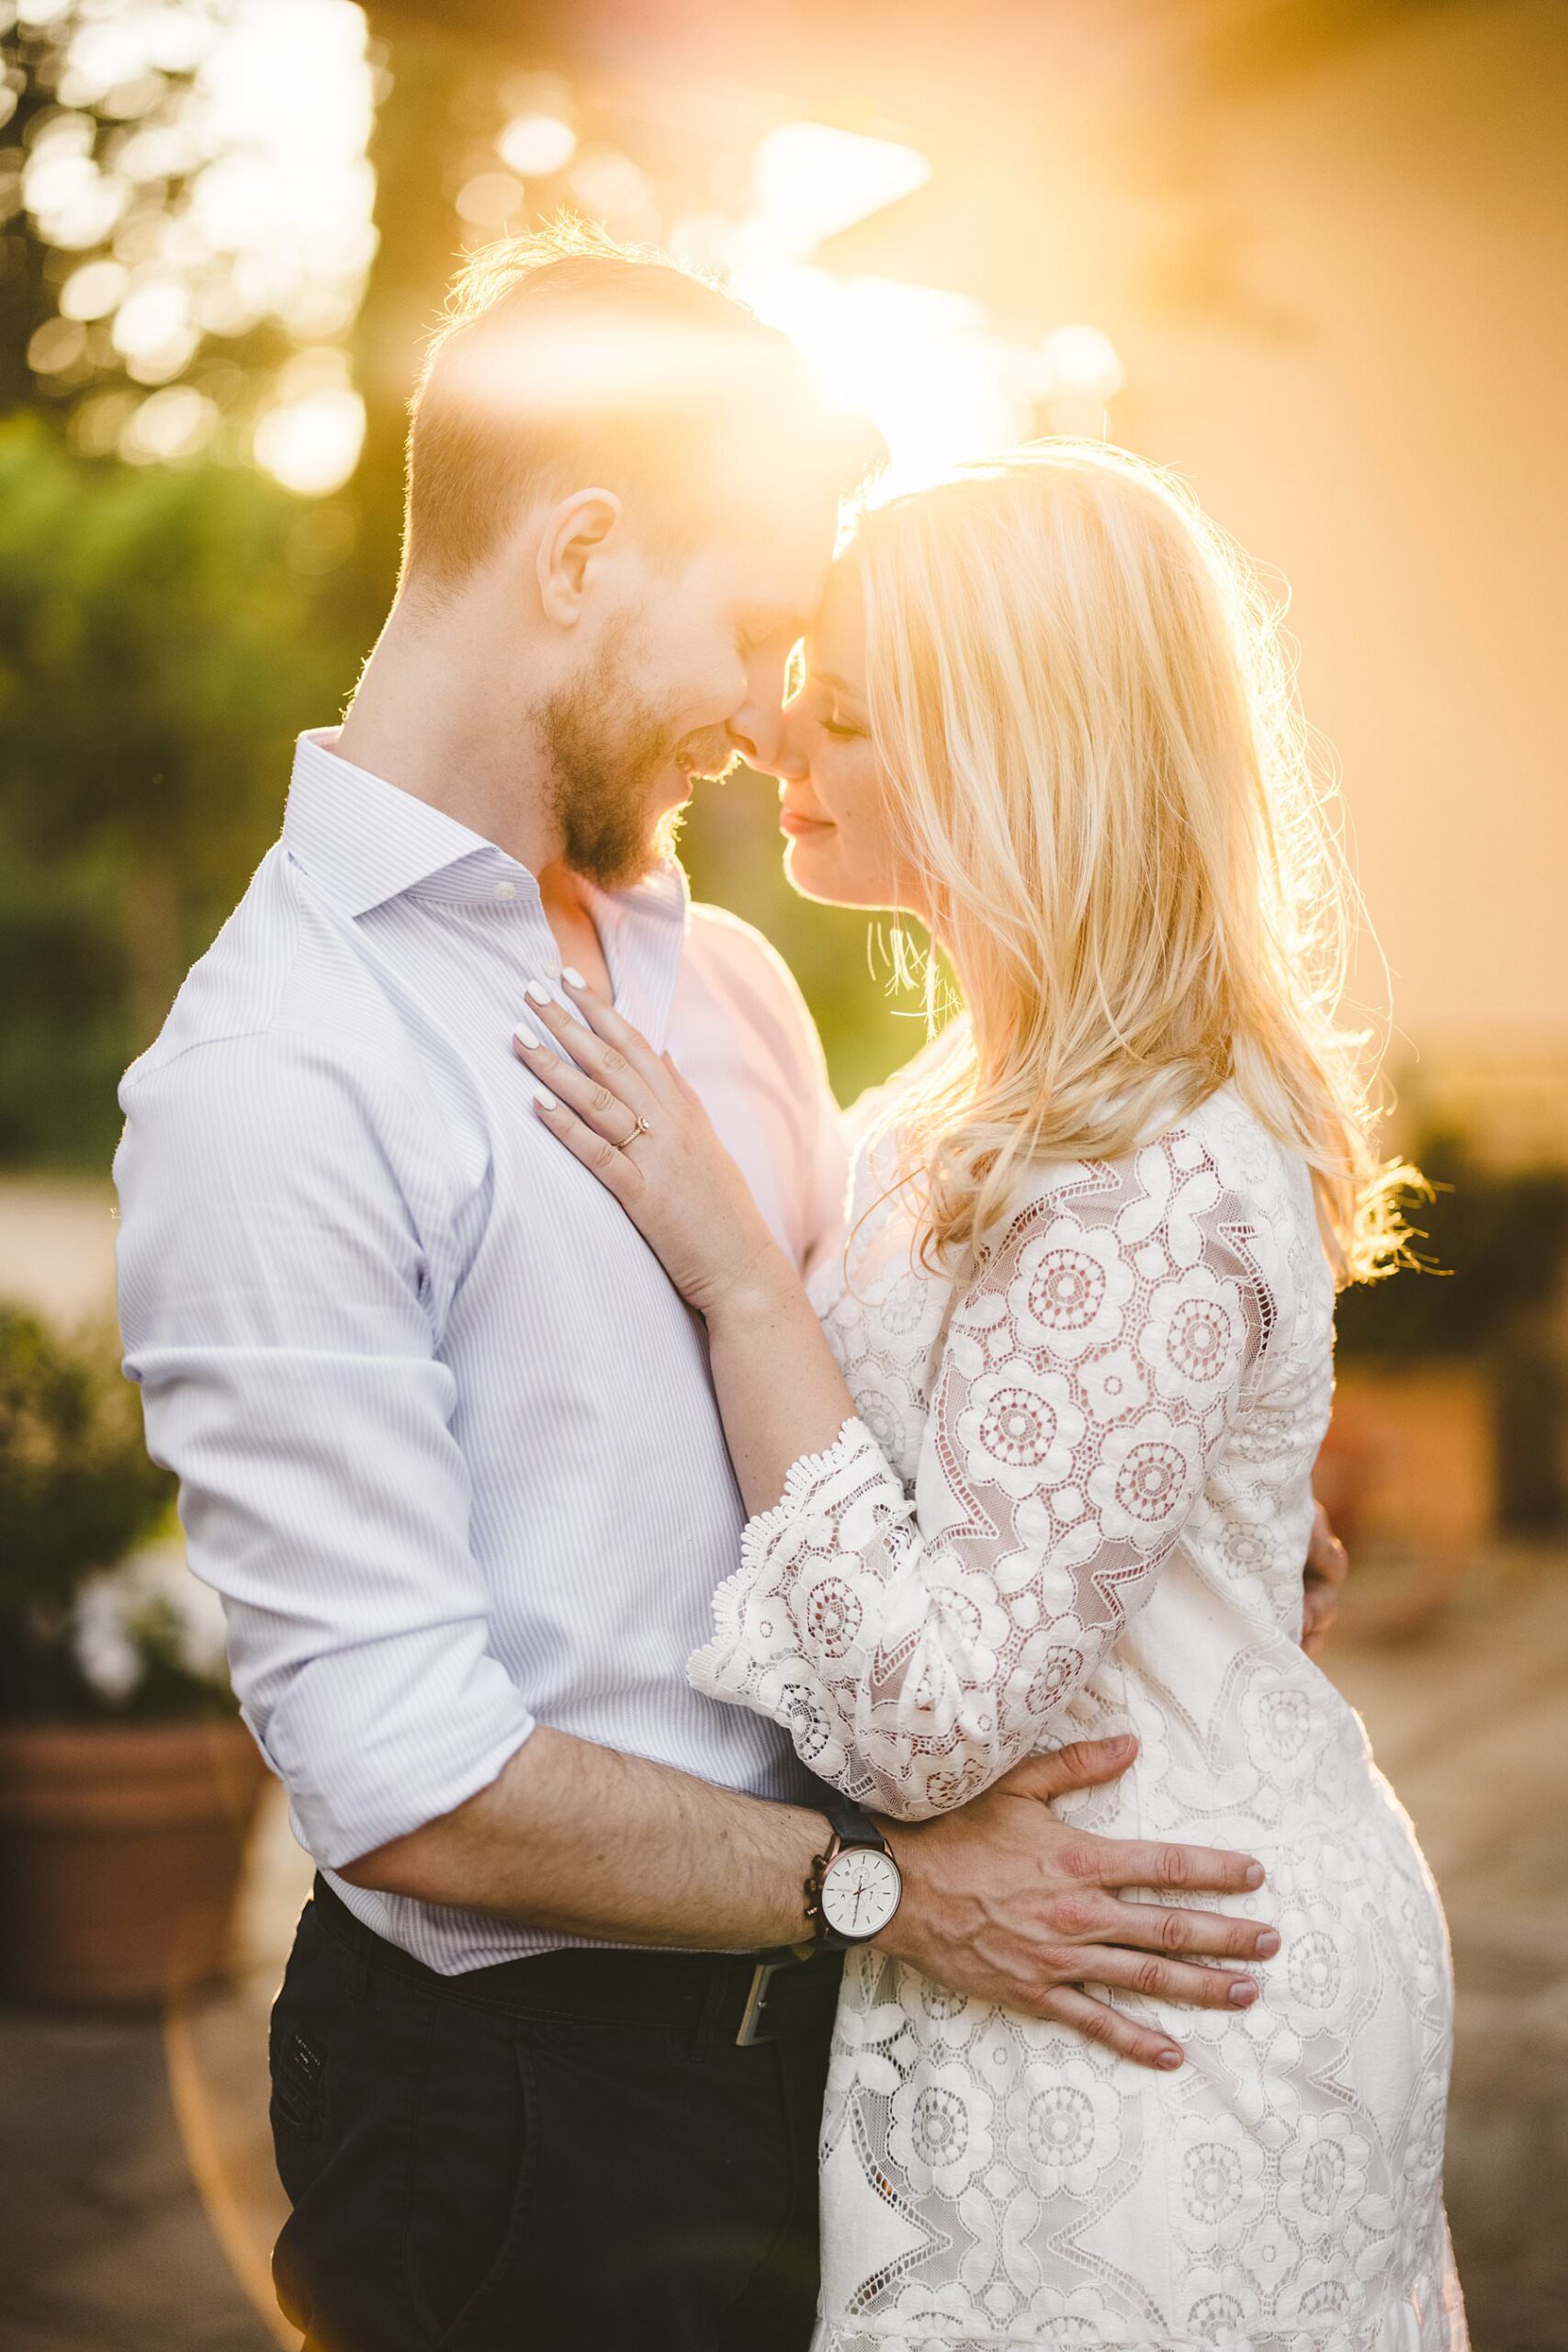 Beautiful and emotional engagement photo session during golden hour in the heart of Tuscany at Poggio Tre Lune not far away from Florence